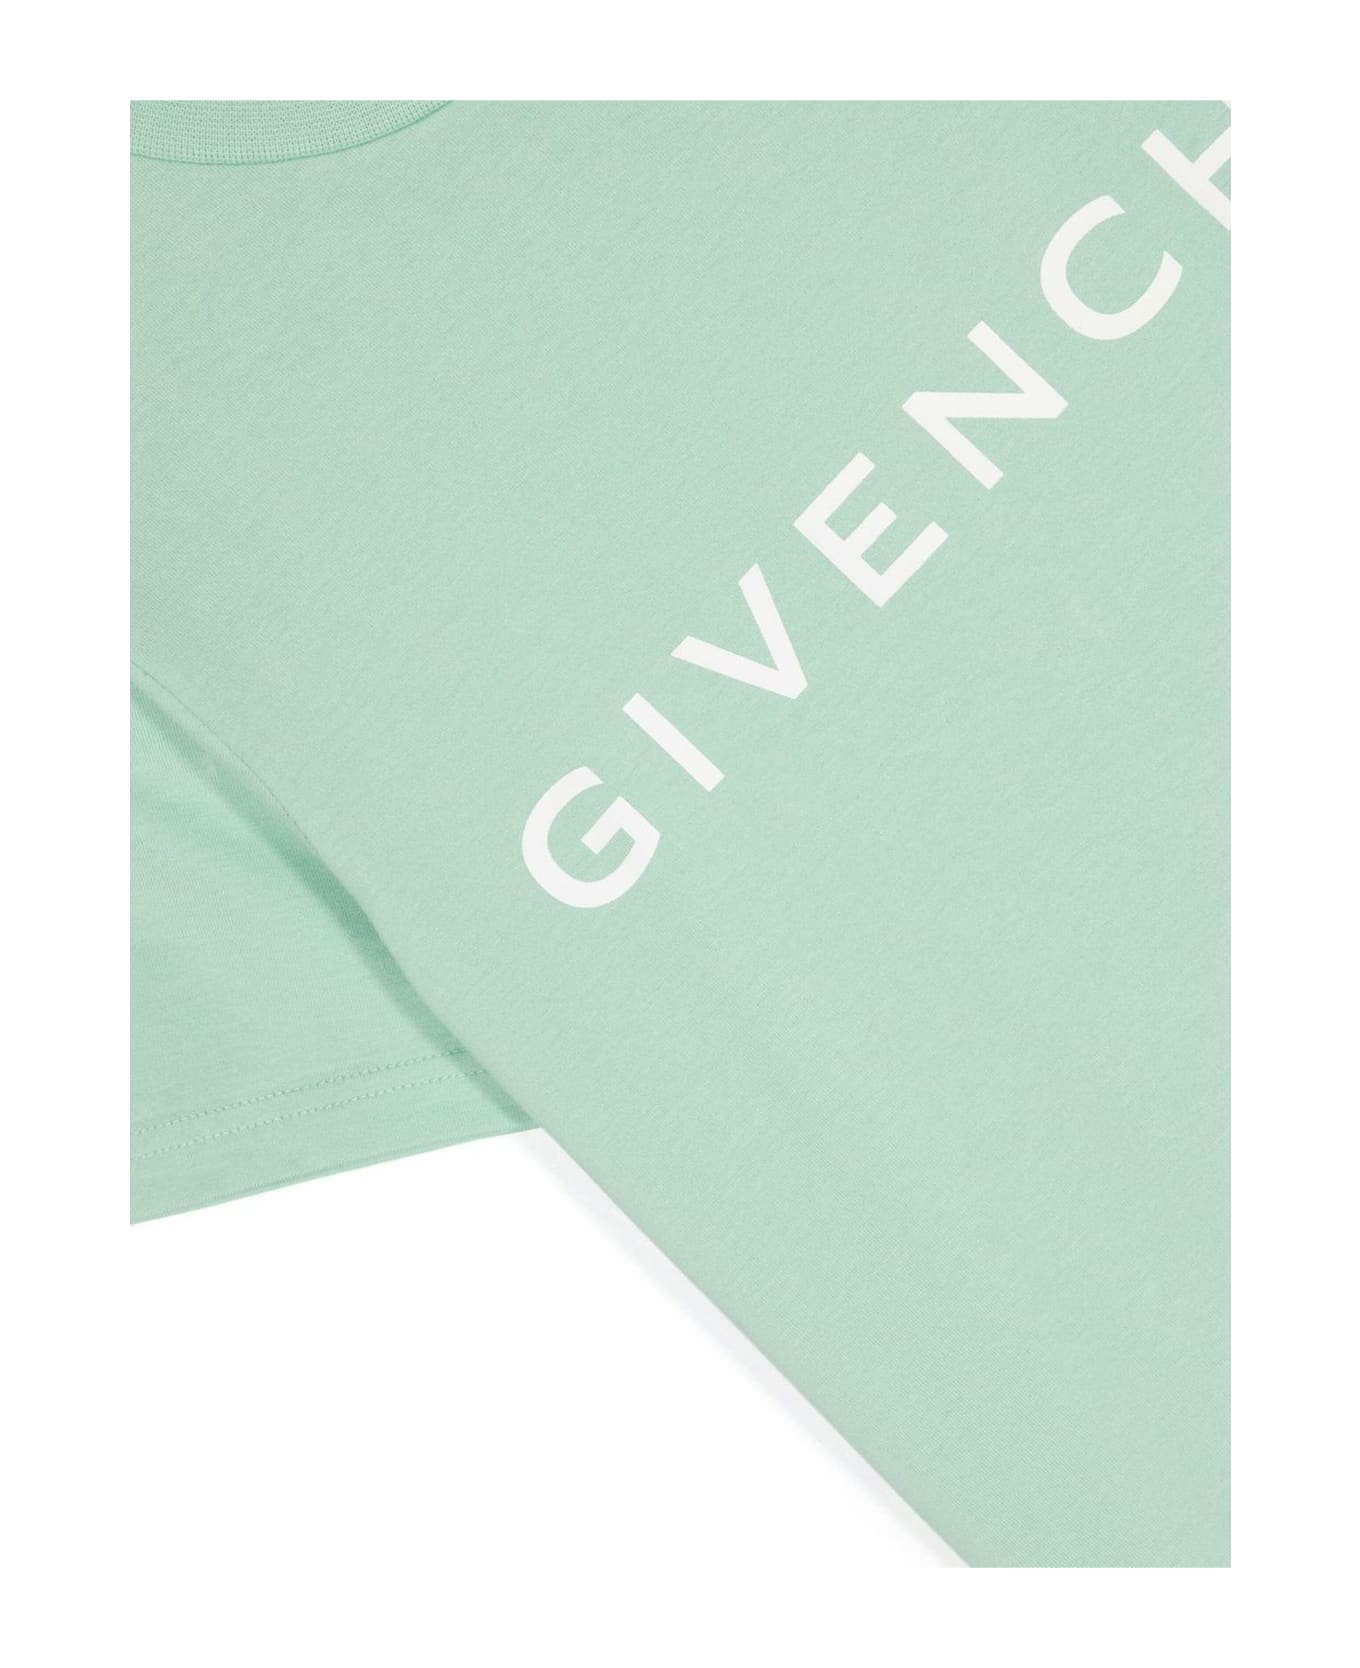 Givenchy Green Cotton Tshirt - Verde